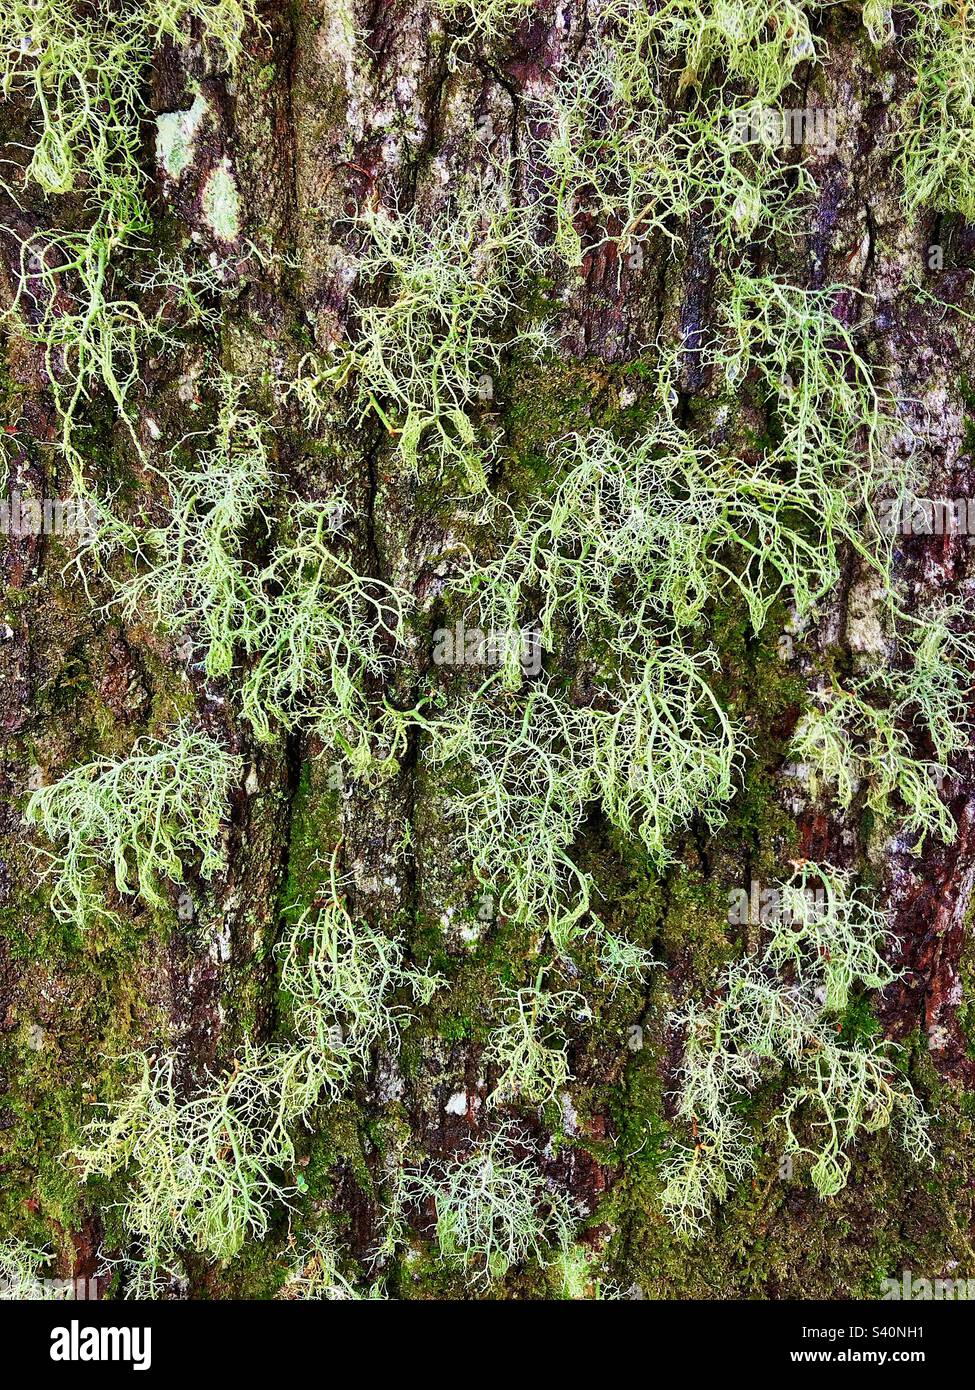 Beard lichen growing on tree bark in the New Forest National Park Stock Photo